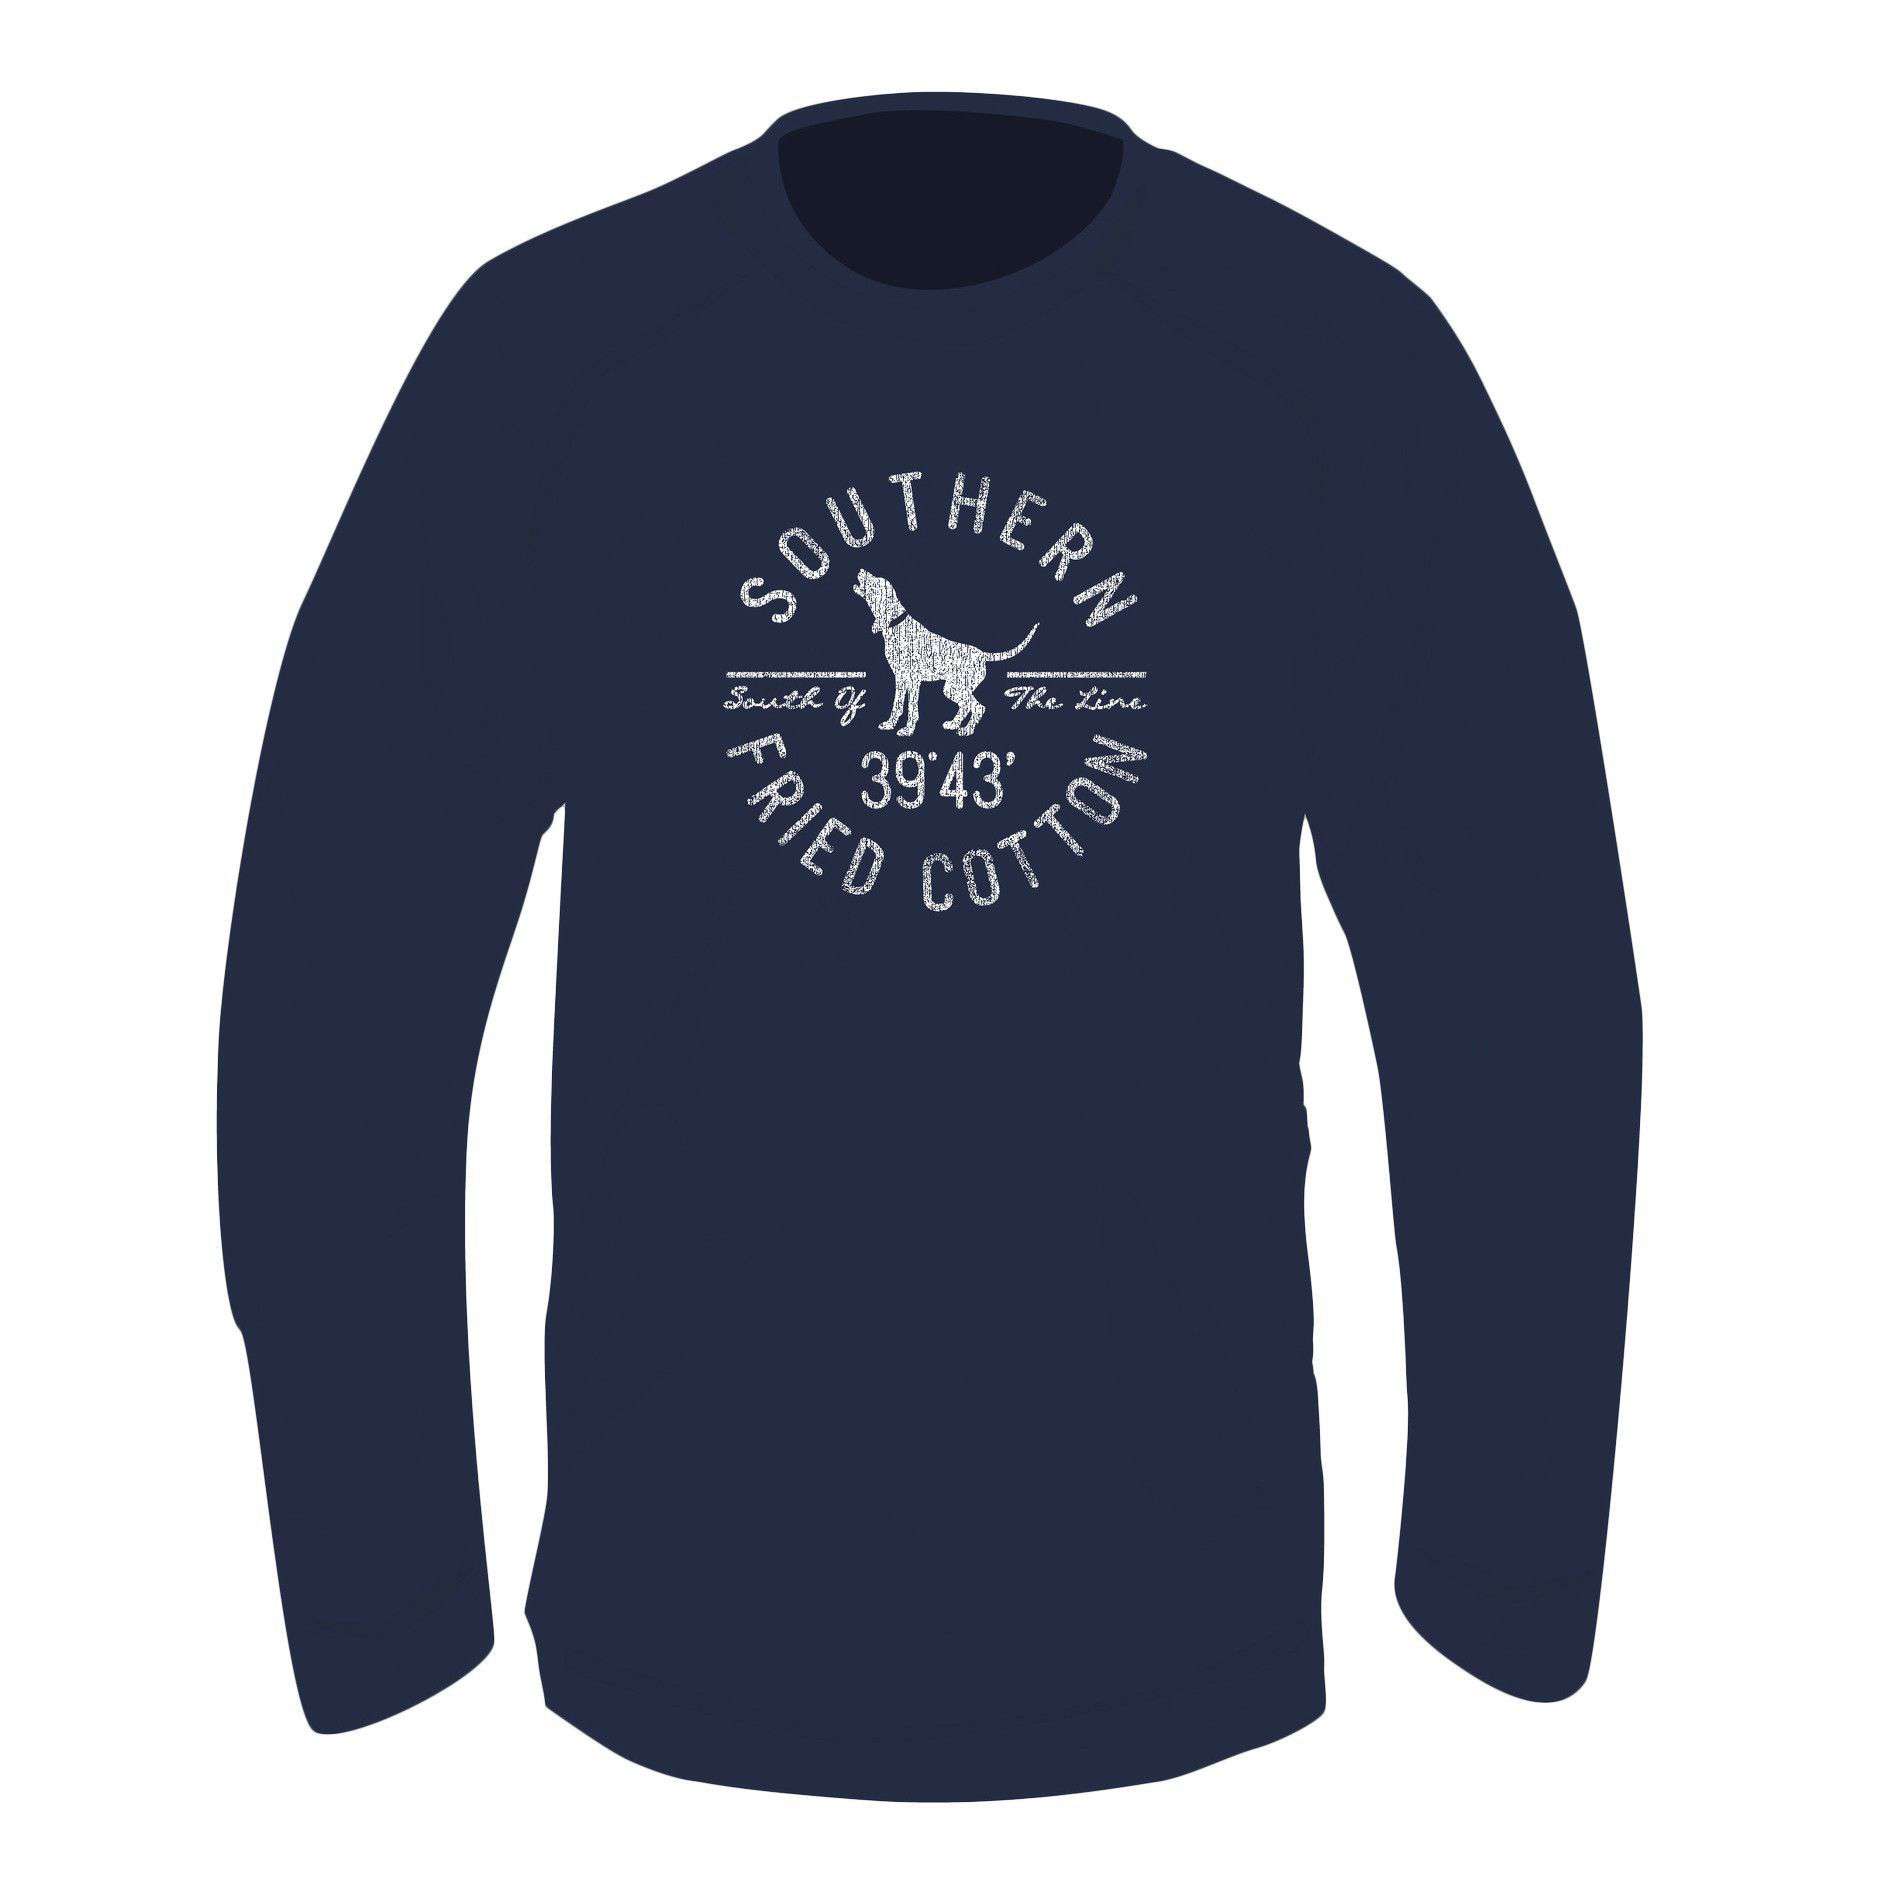 Hound Circle Crew Neck Fleece in China Blue by Southern Fried Cotton - Country Club Prep